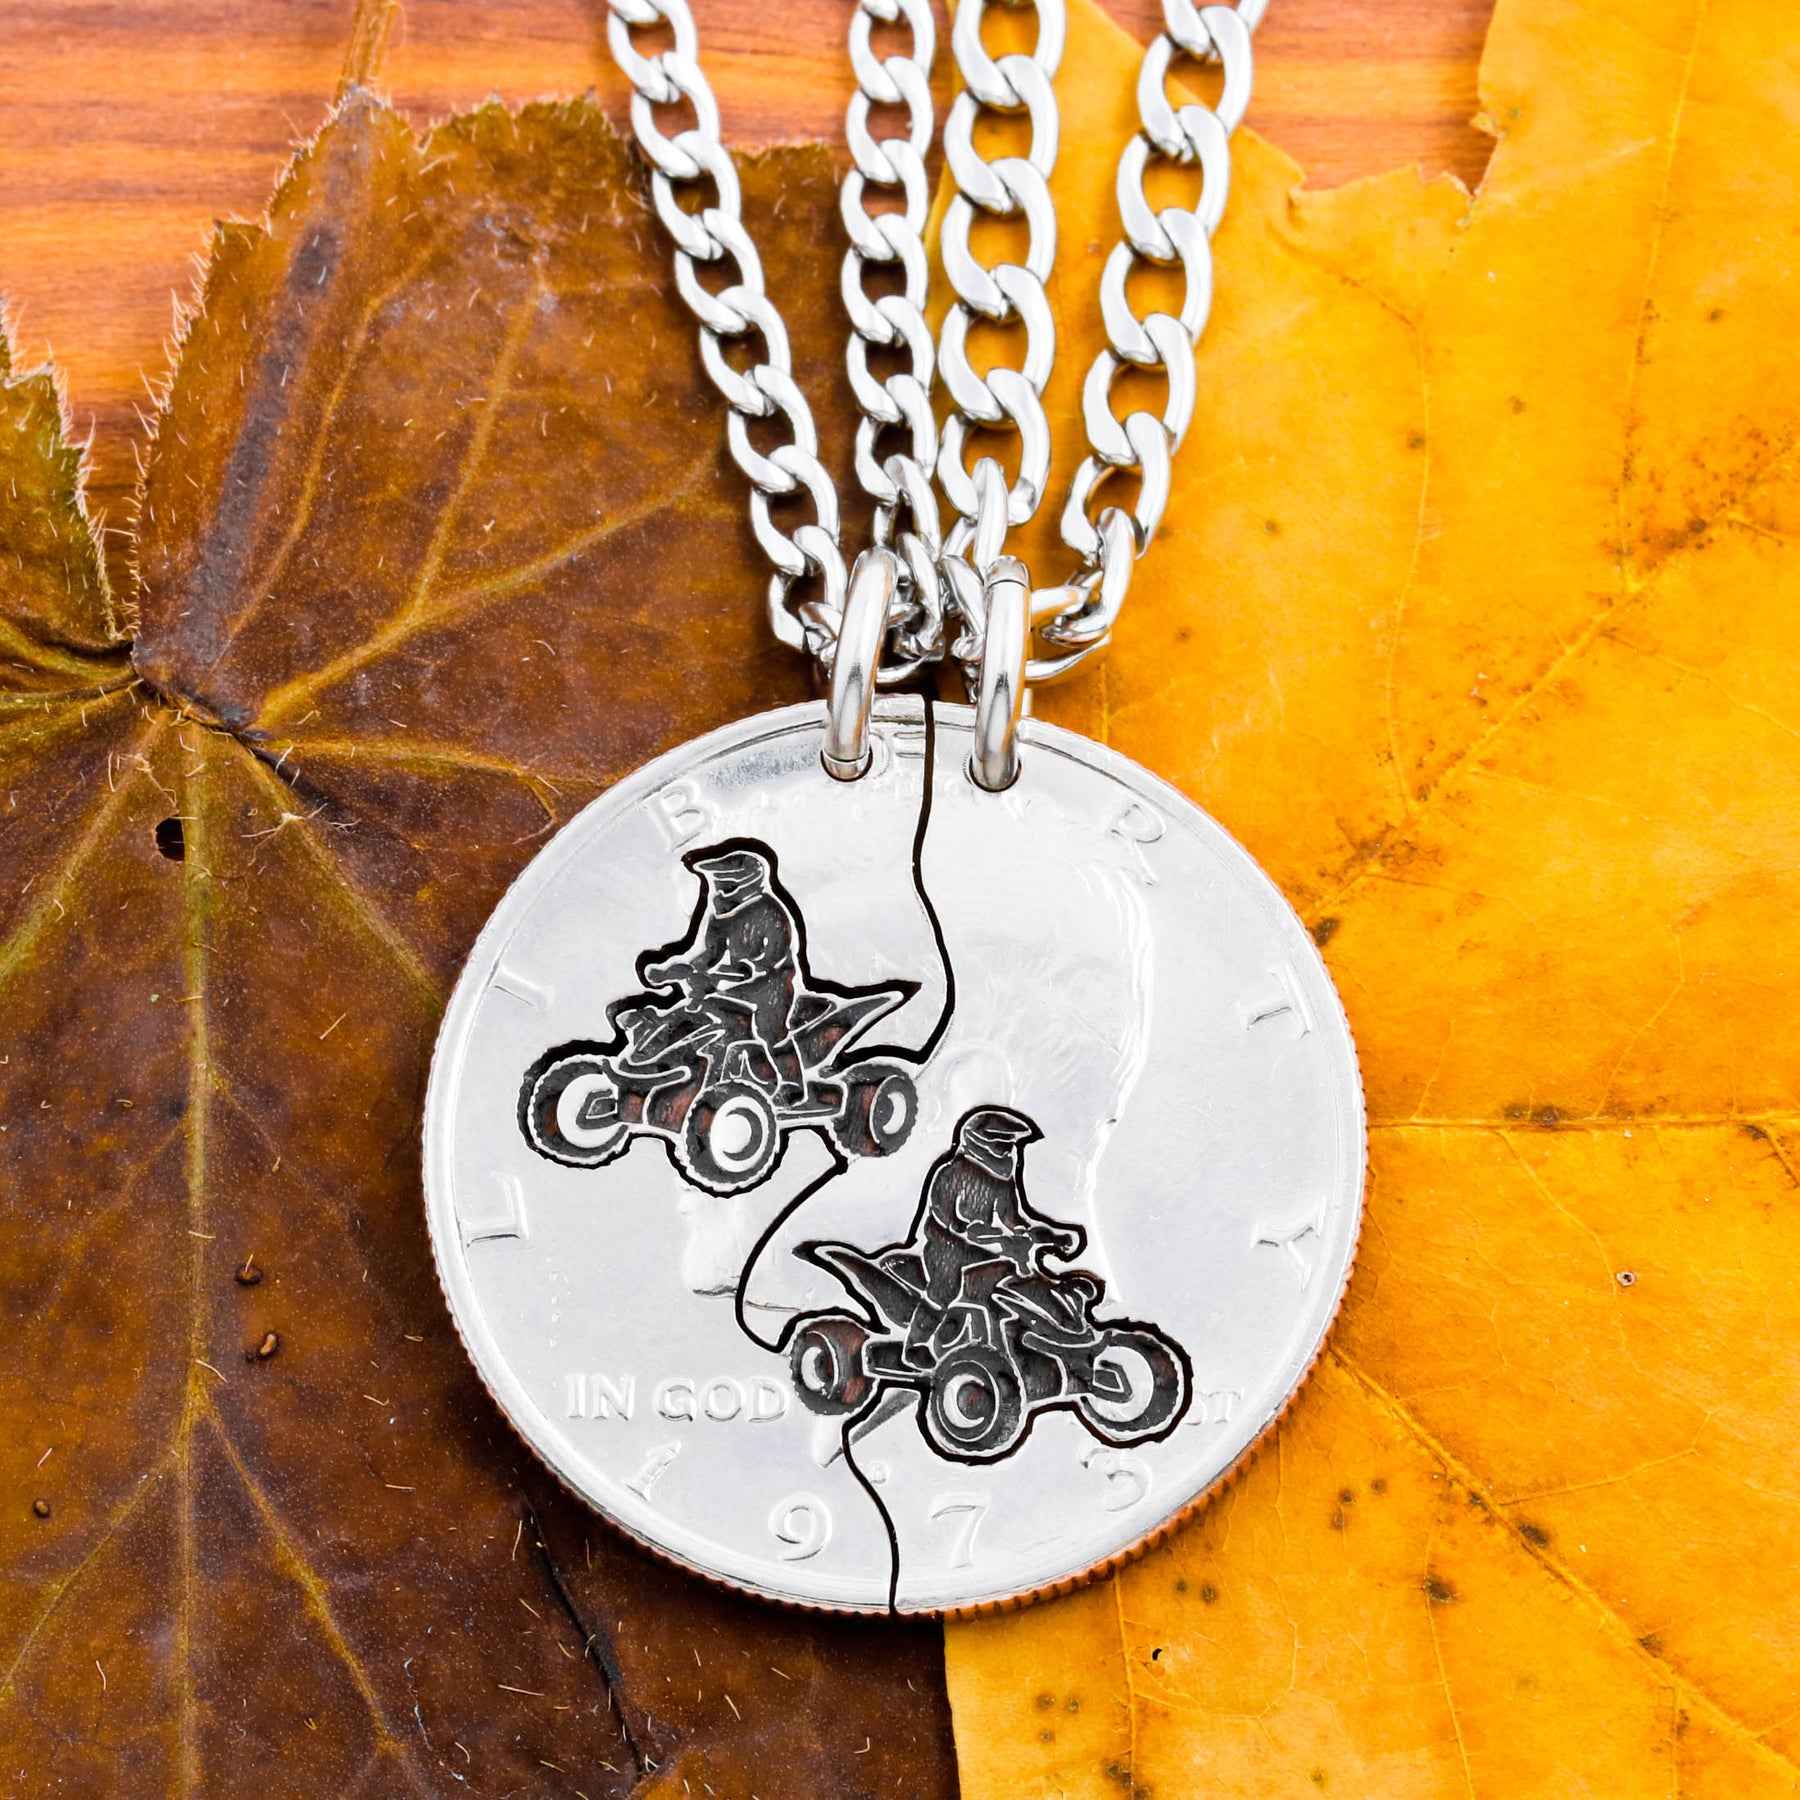 Motocross Dirt Bike Necklaces, Extreme Couples or Best Friends Gifts, Guys  Jewelry, Interlocking Relationship Set, Hand Cut Coin - Etsy